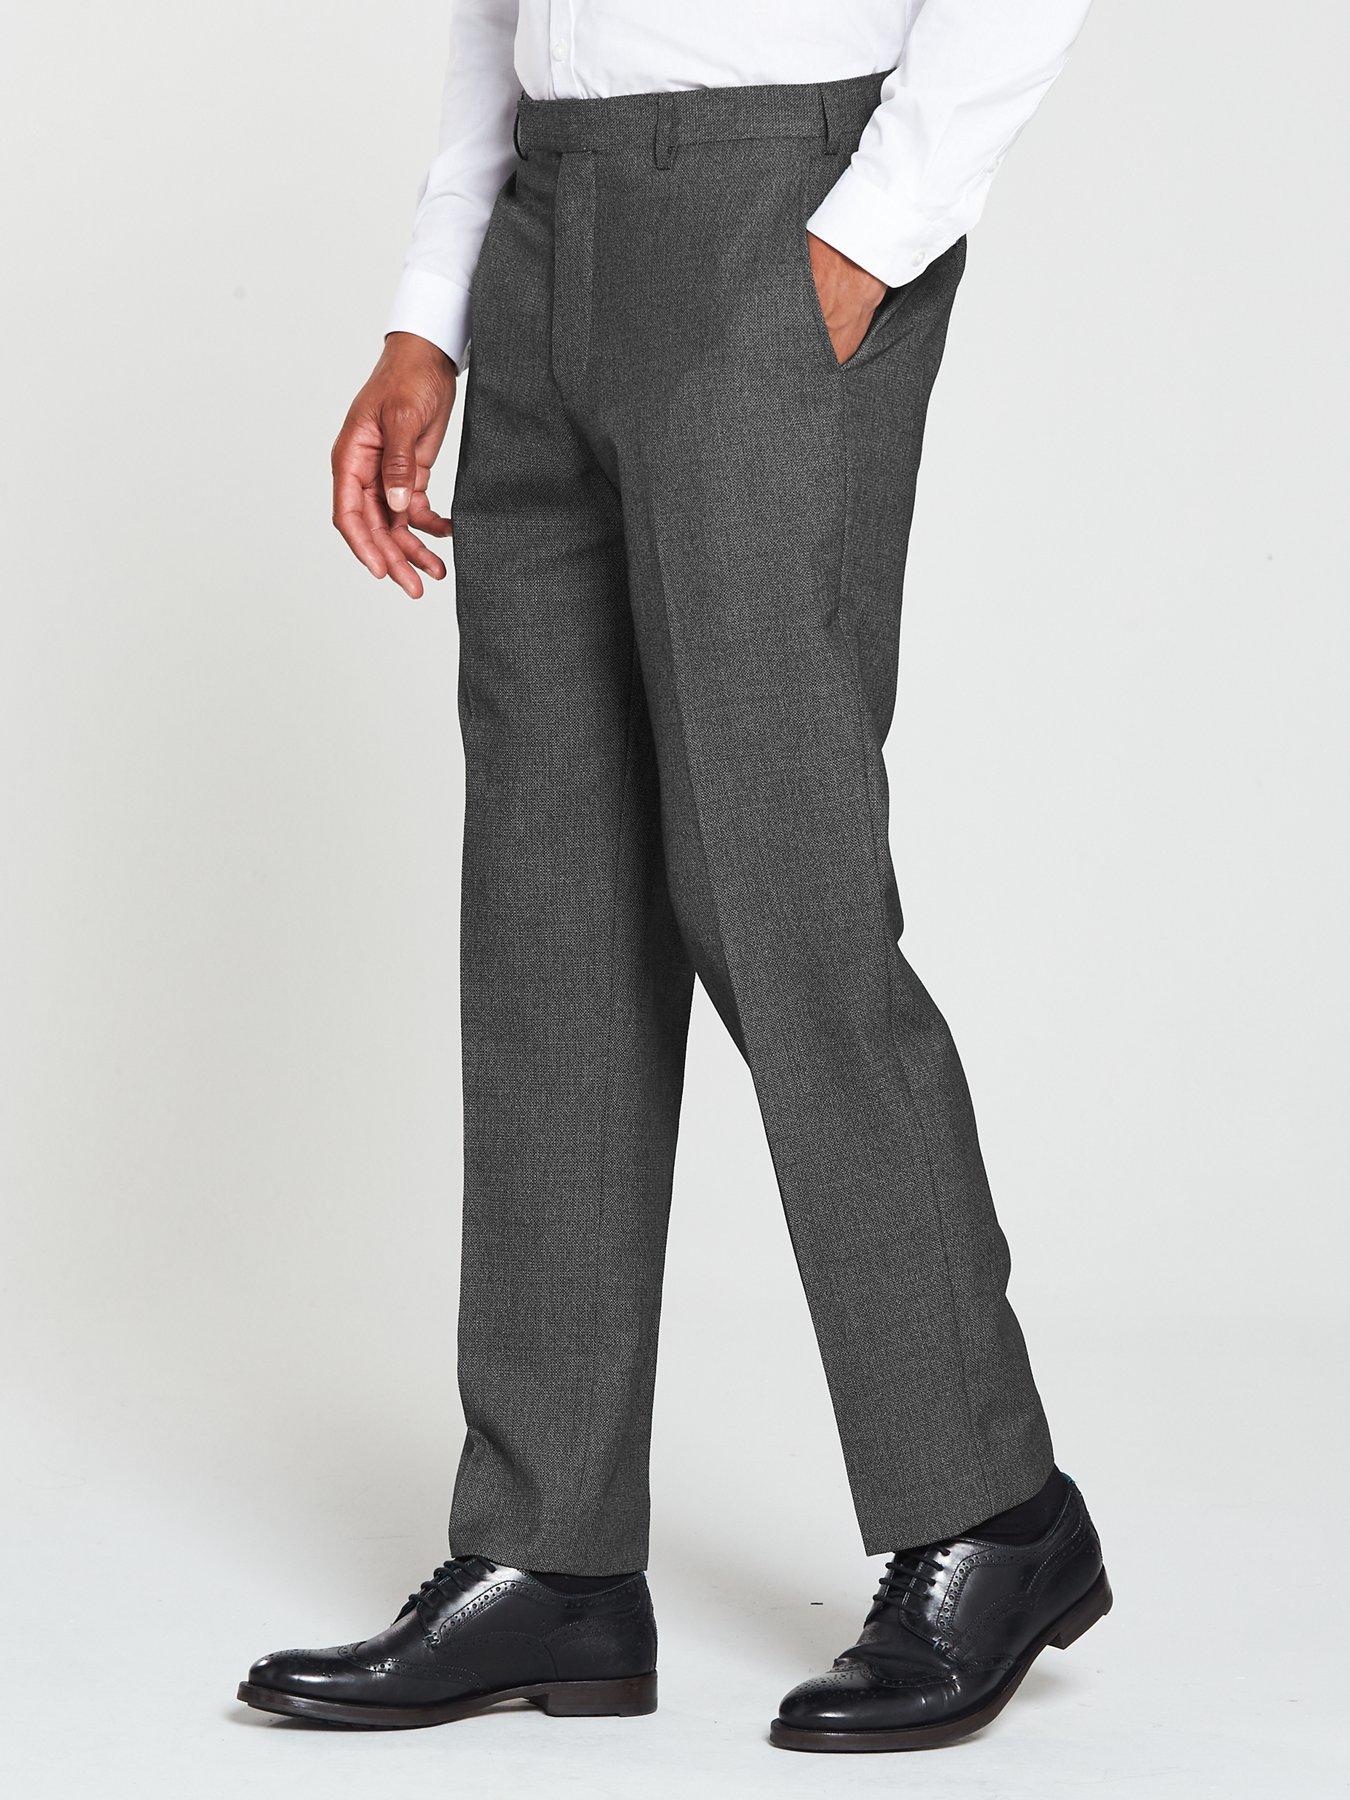  Harcourt Tailored Trouser - Grey